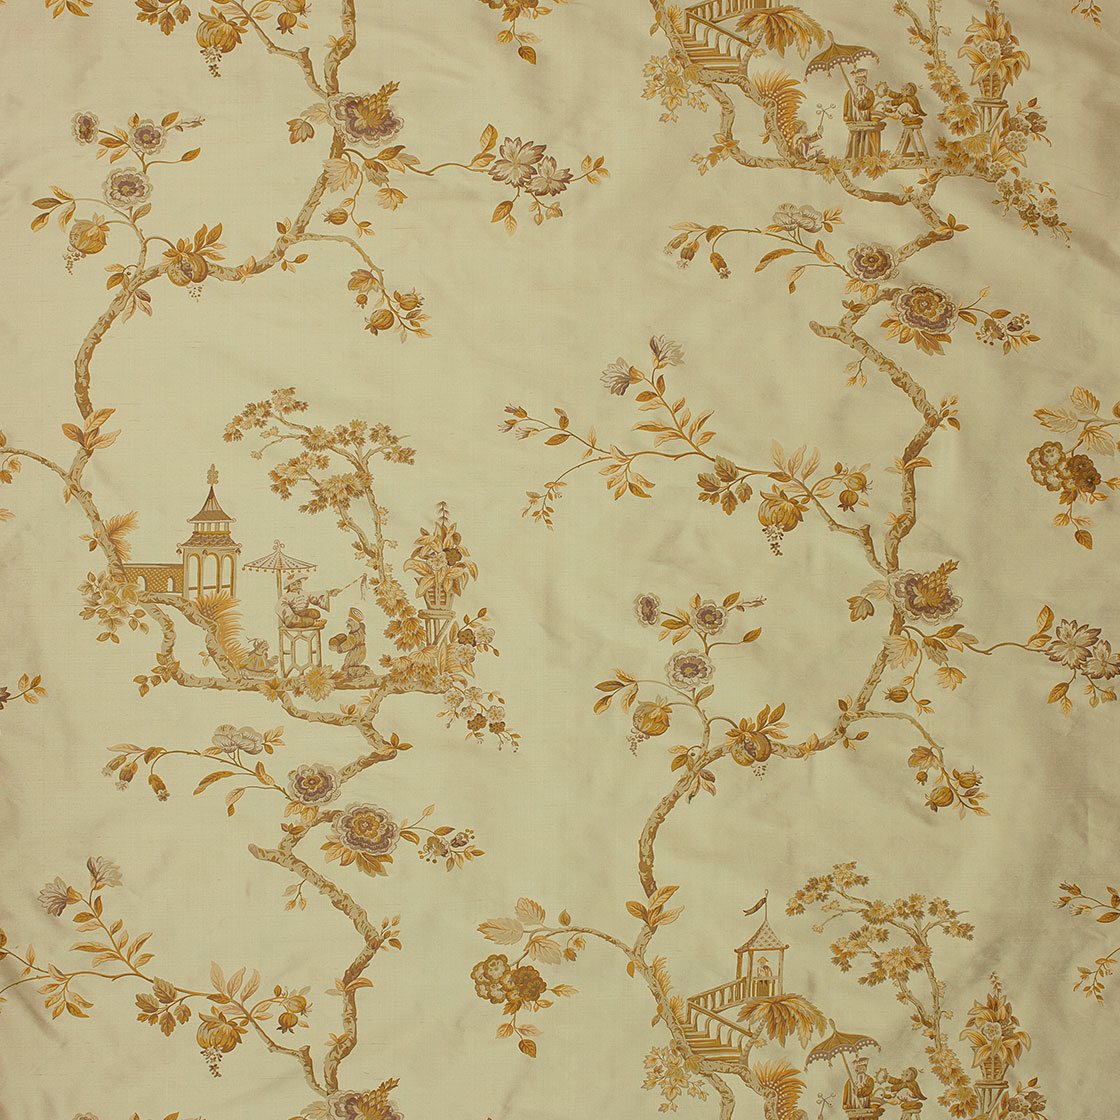 Cathay printed silk - Antique gold - Beaumont & Fletcher